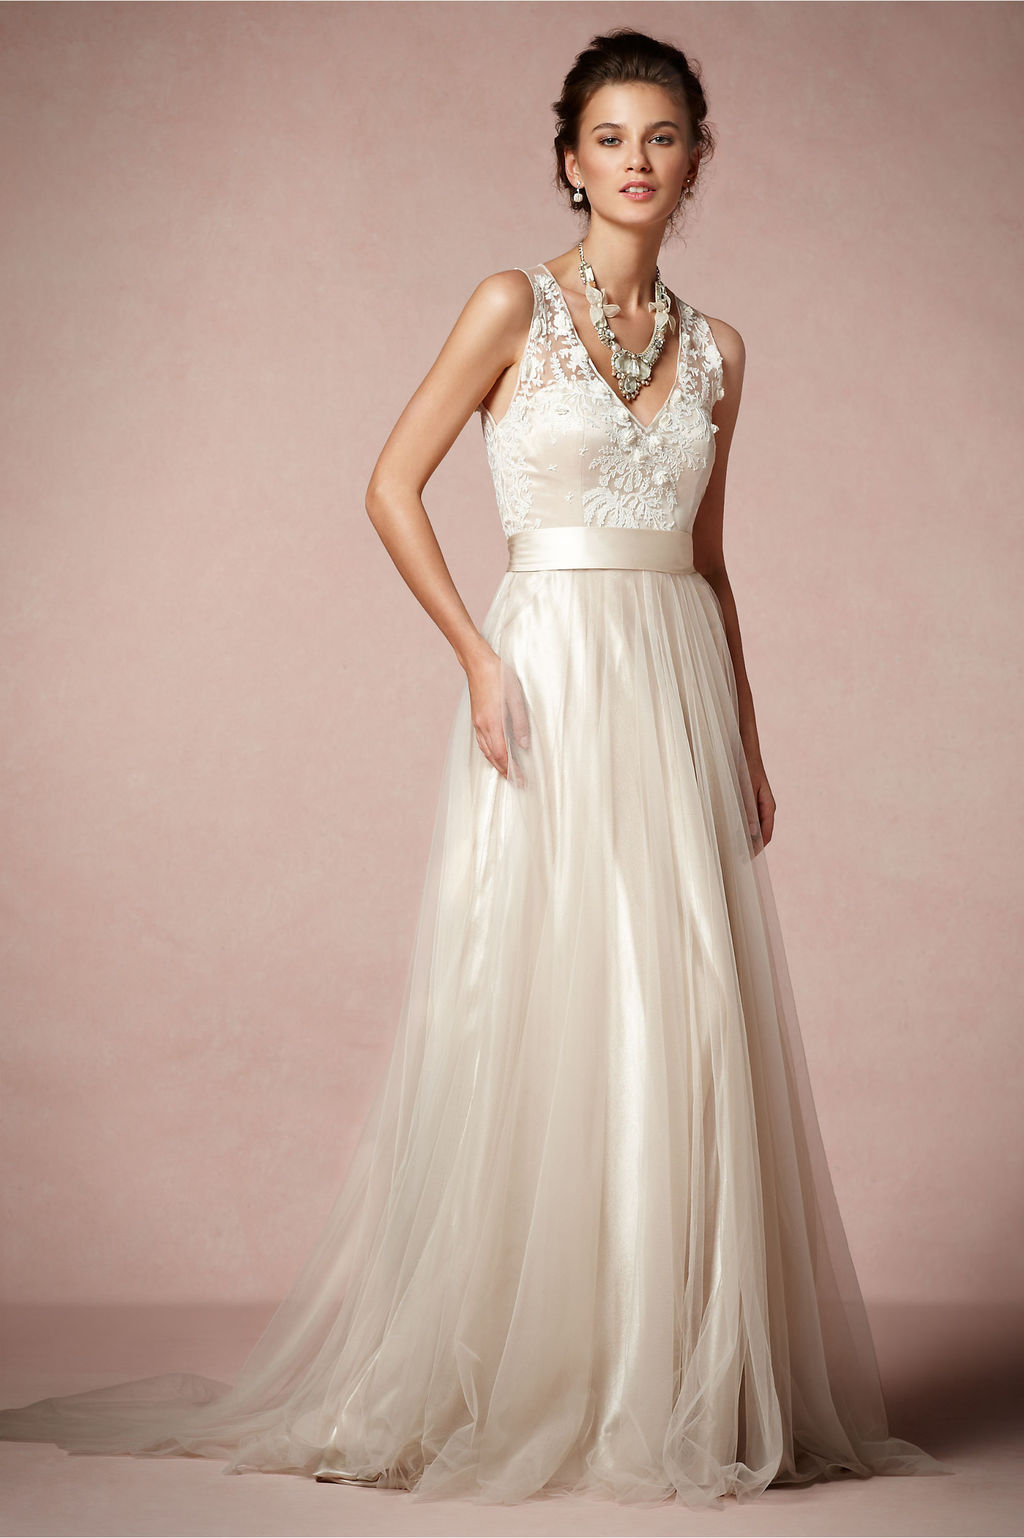 Timeless And Classy Blush Wedding Dresses – The WoW Style